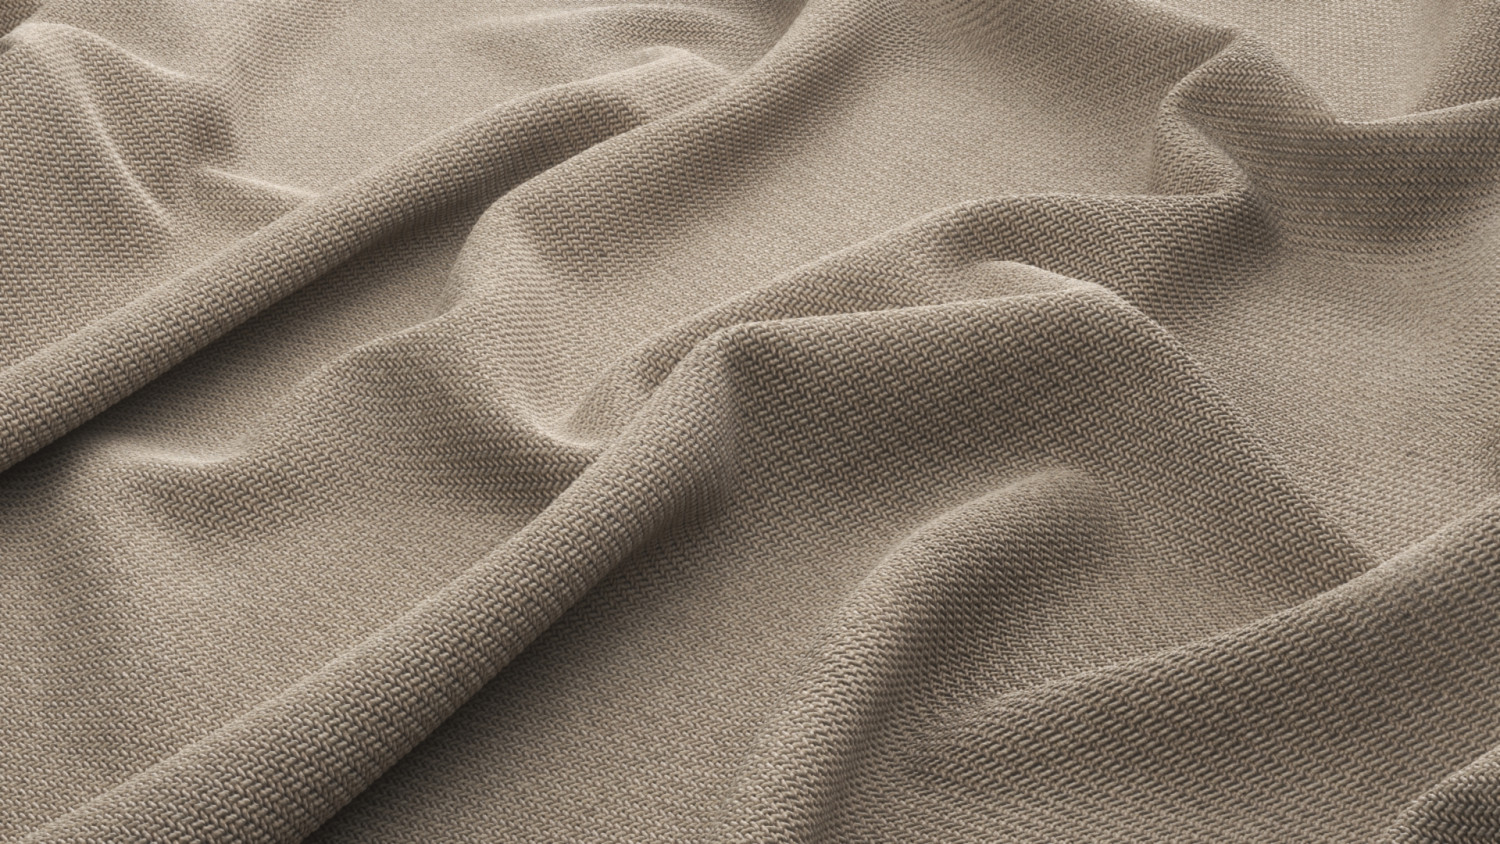 Thick fabric texture